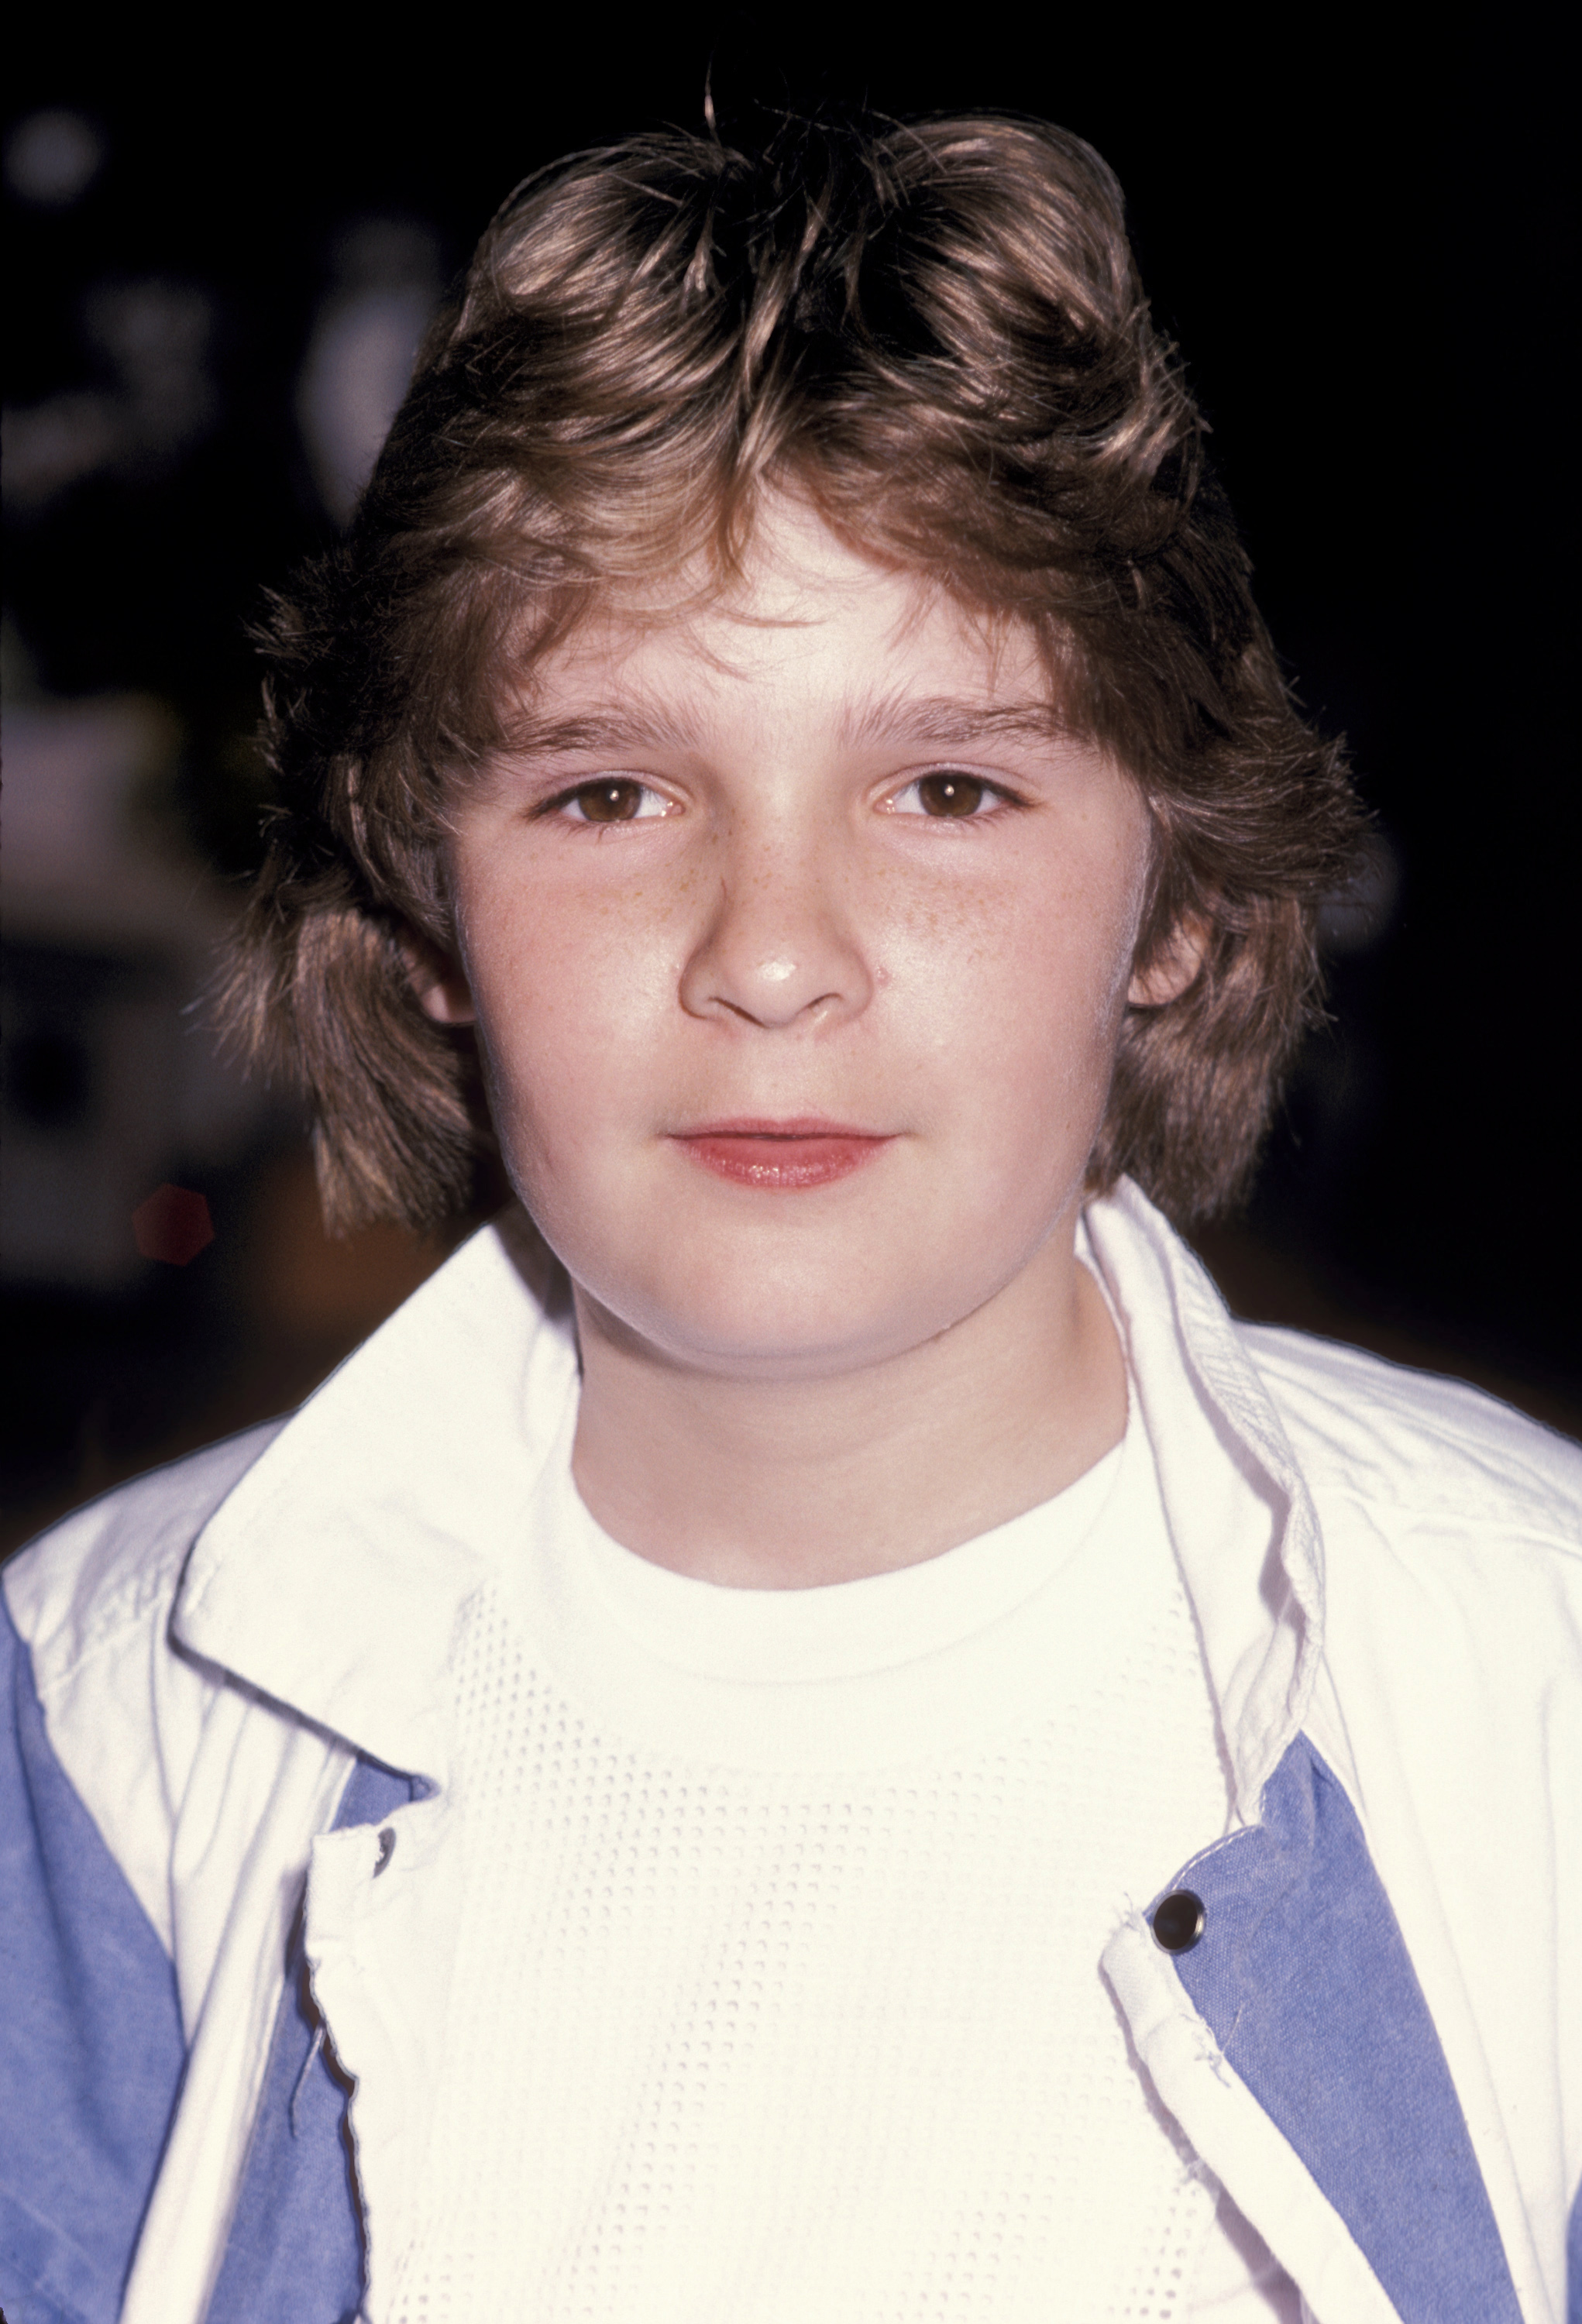 Corey Feldman attends the screening of "Streets of Fire" on May 29, 1984 | Source: Getty Images